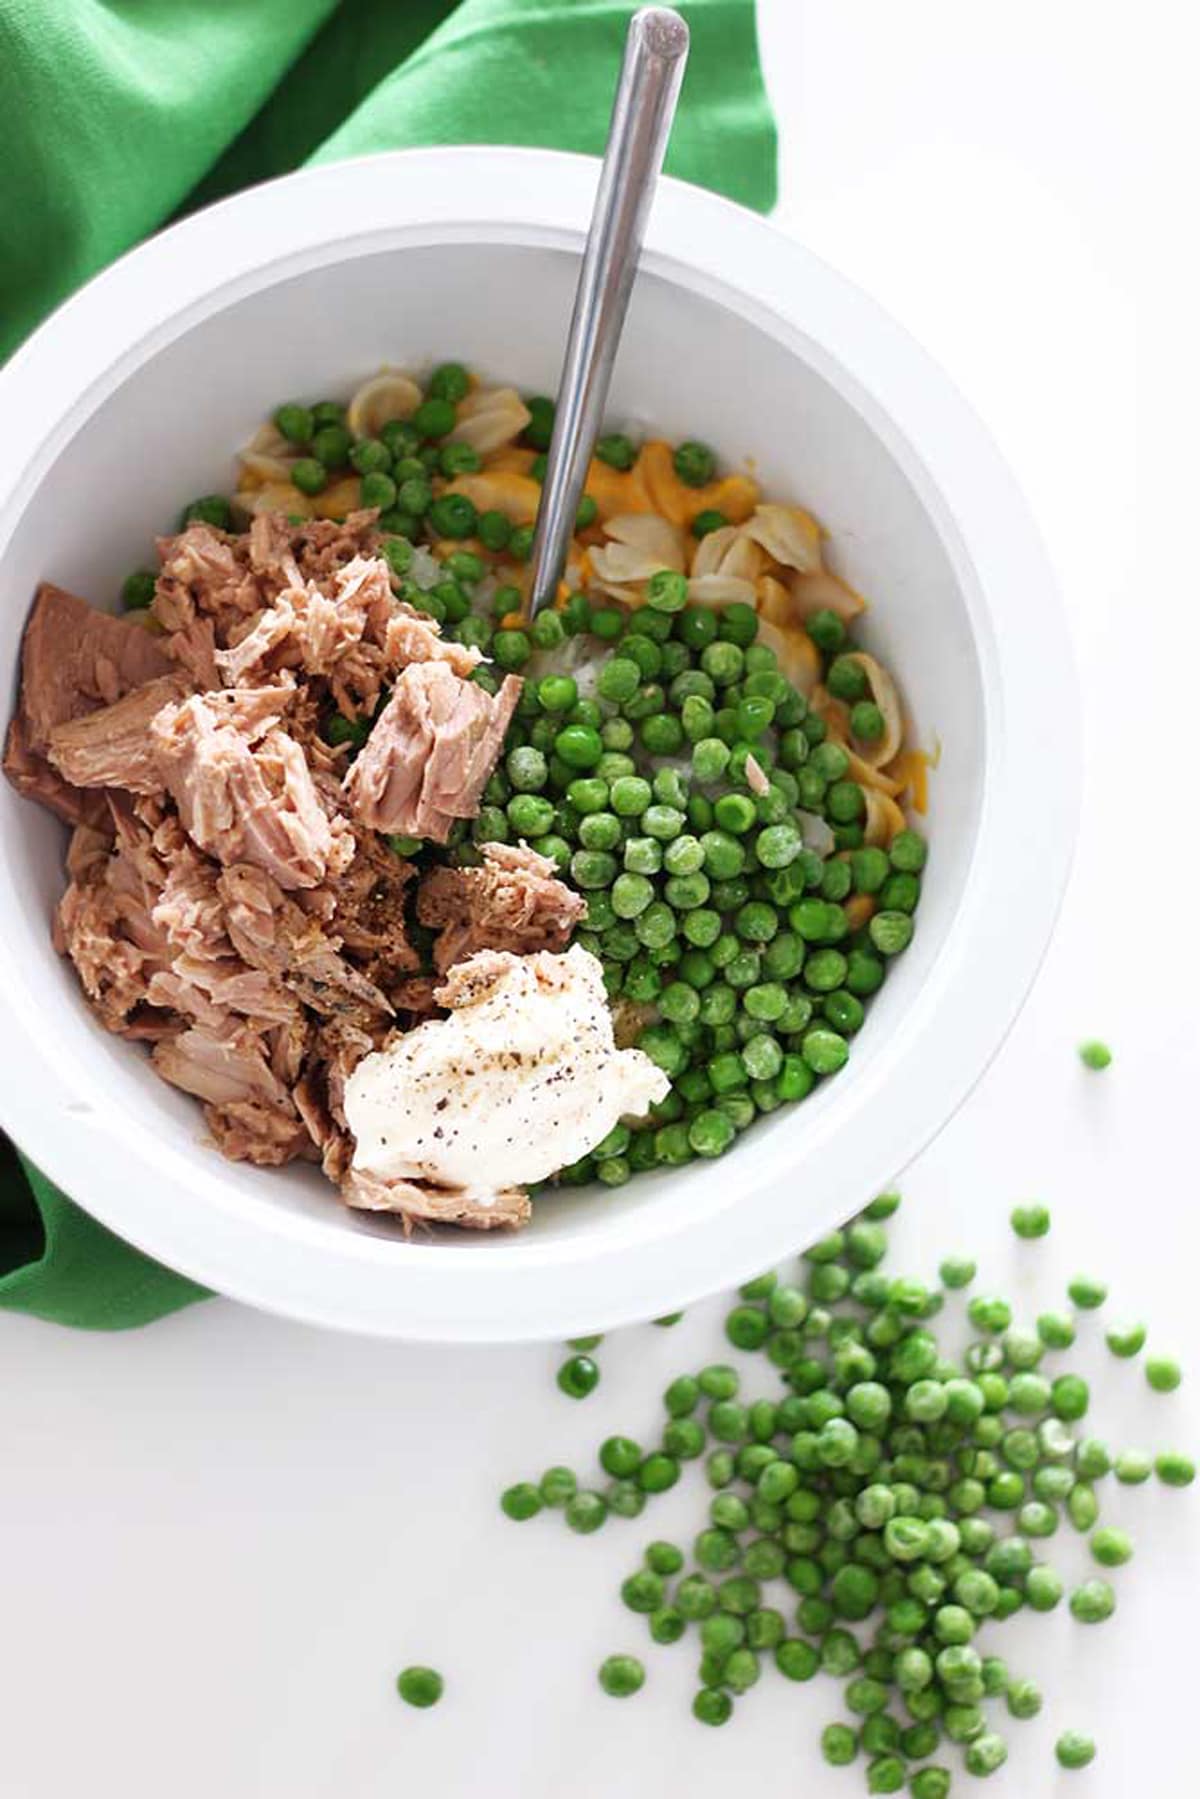 White mixing bowl with canned tuna, peas, shells and cheese and a silver spoon sitting on a white background with loose peas and a green napkin.